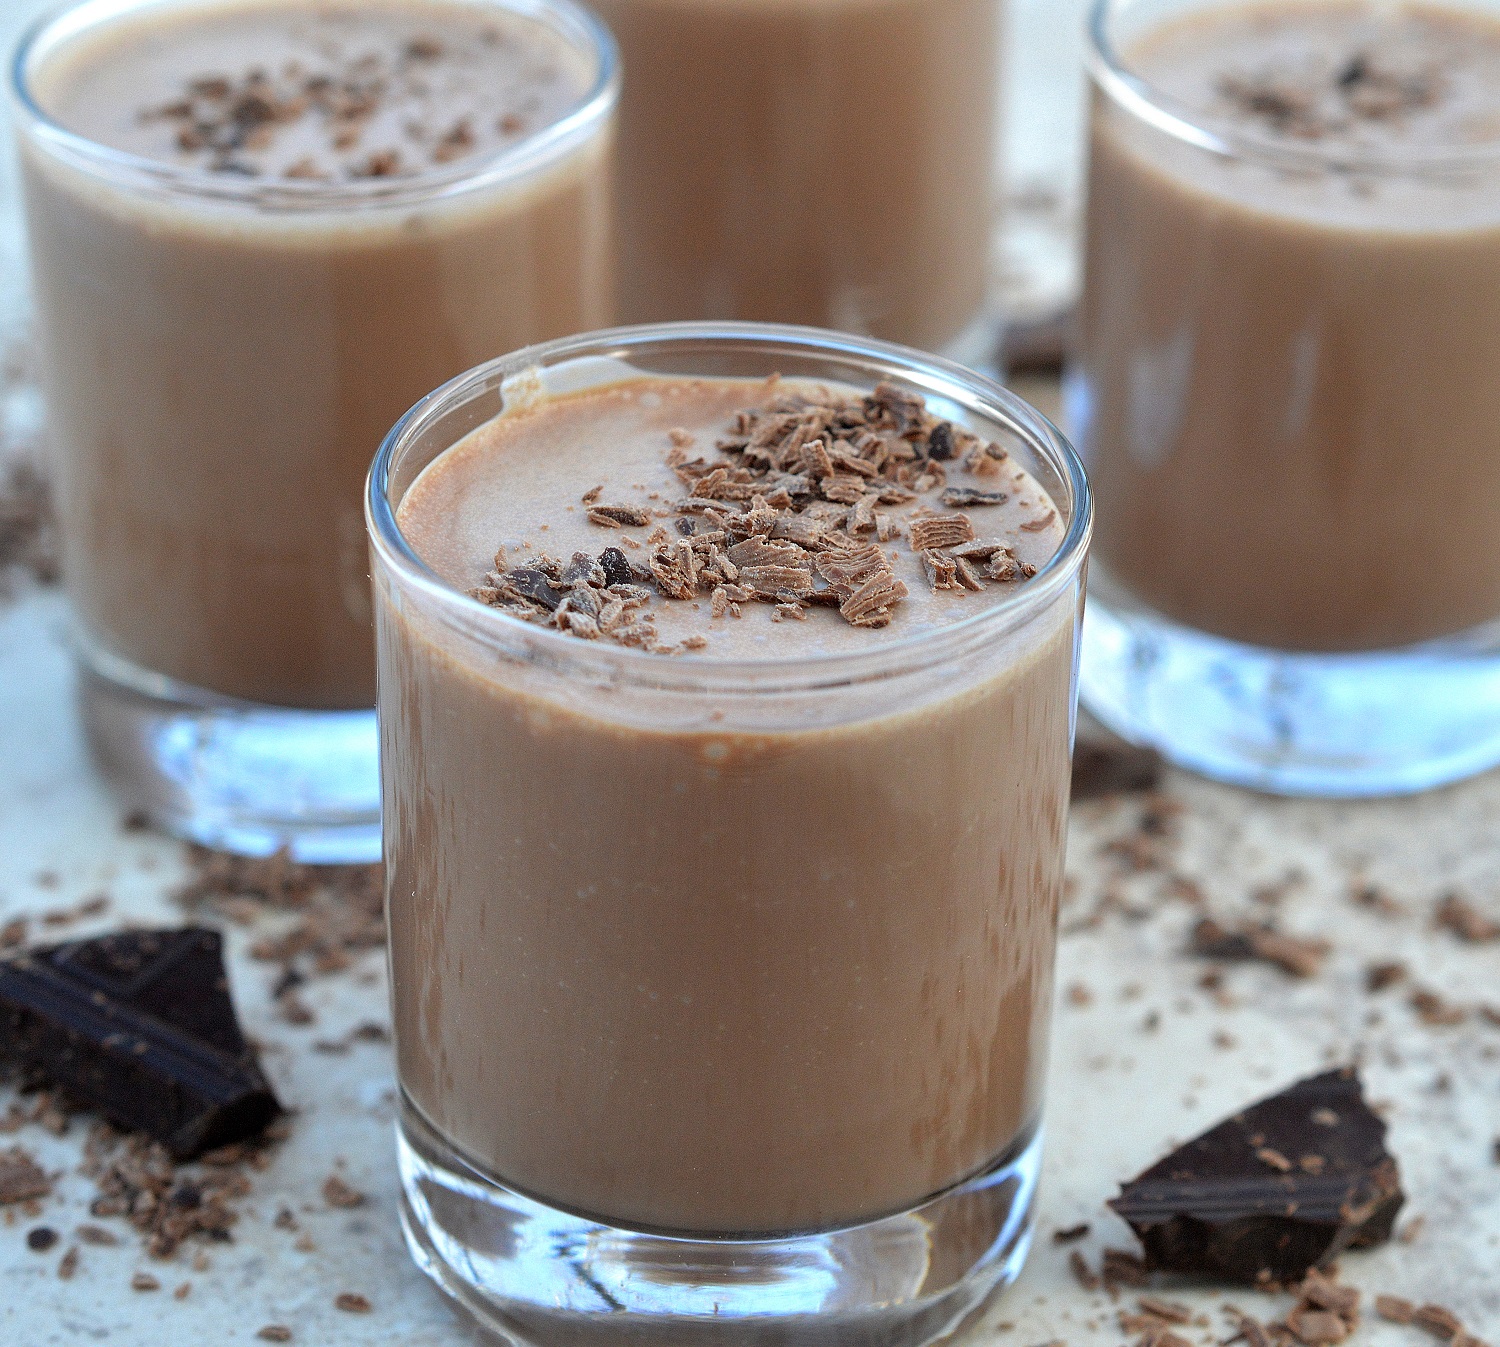 Decadent Recipe for Chocolate Moonshine Shots Just 15 minutes to make!